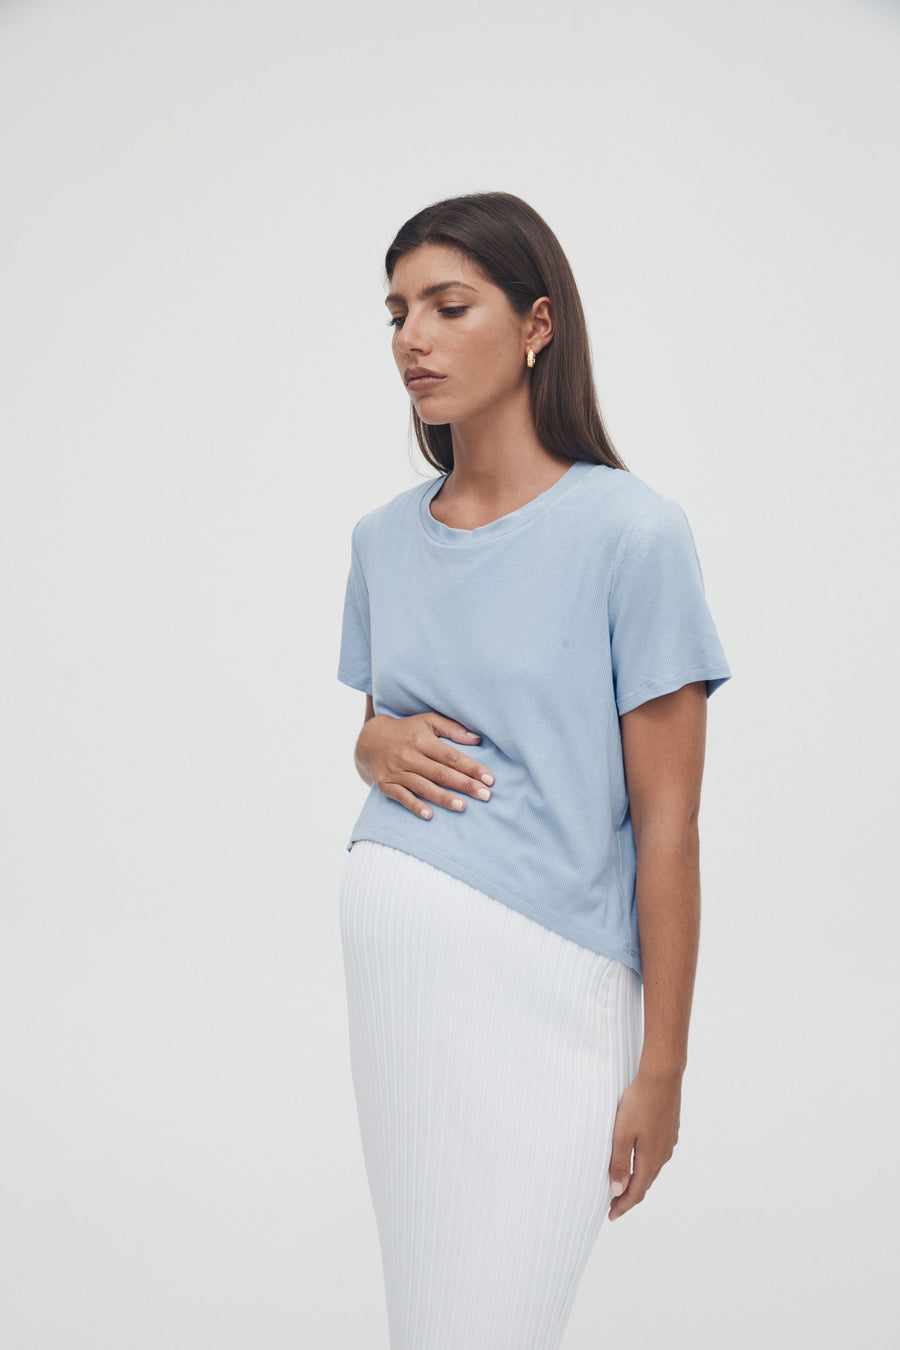 Stretchy Maternity Tee (Pale Blue) 4